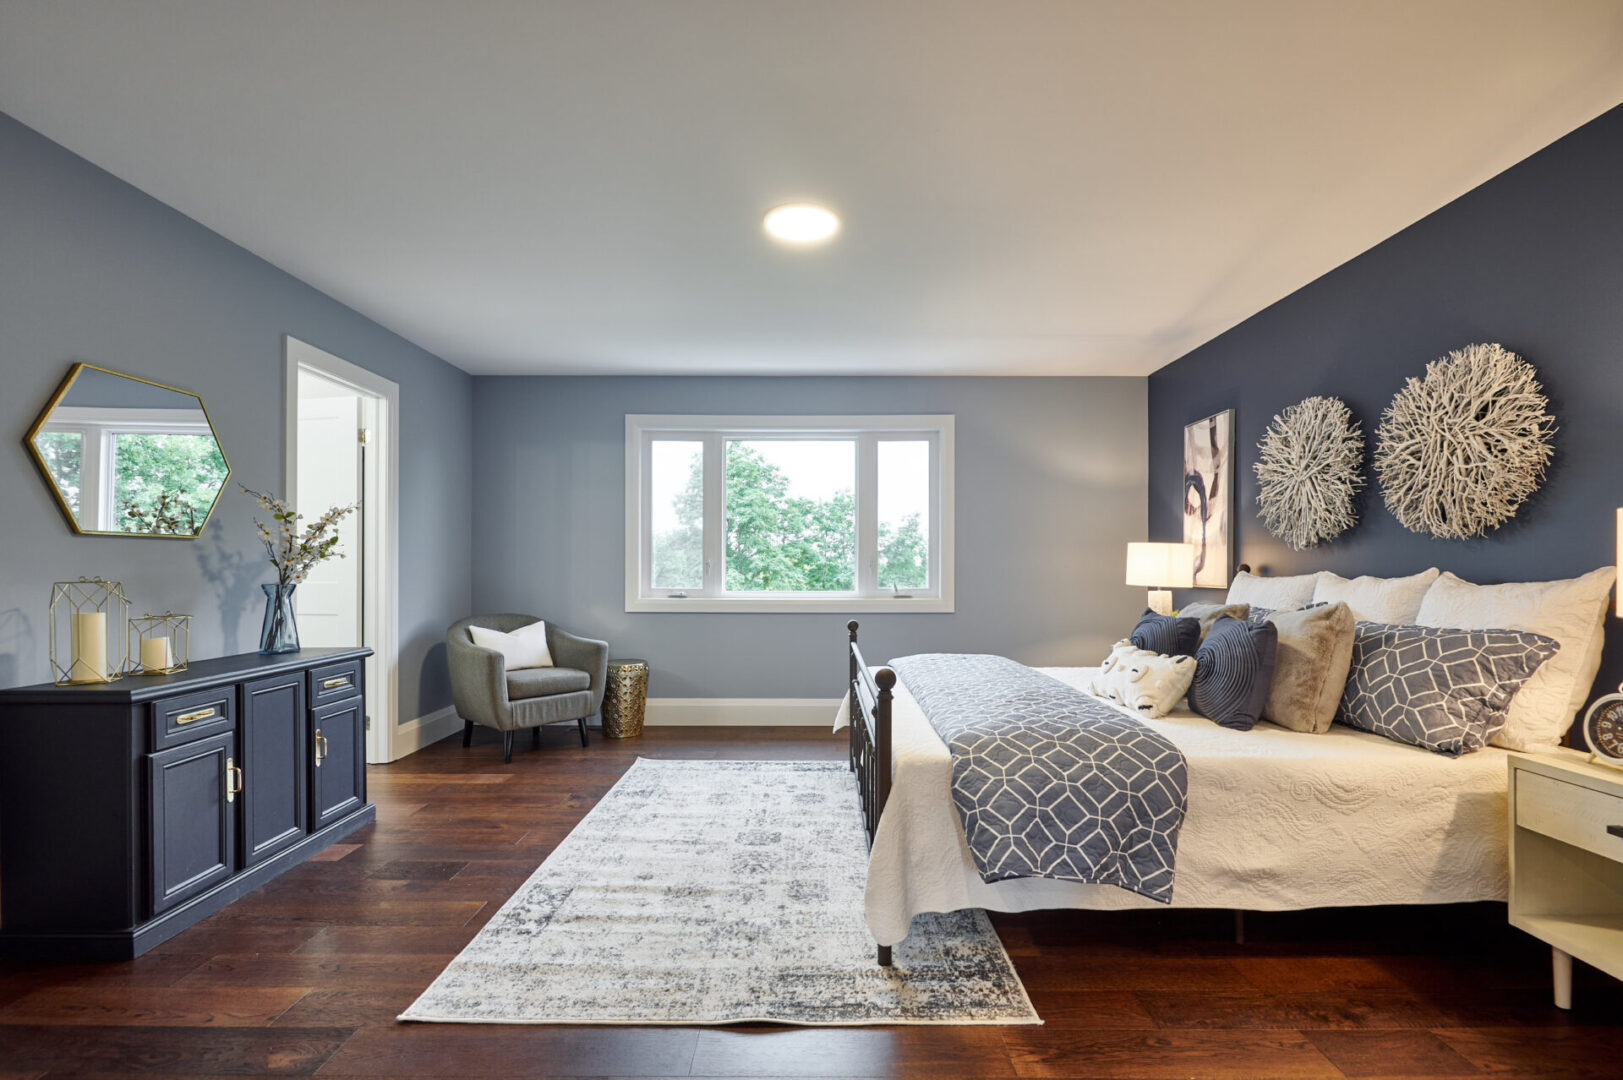 A bedroom with hardwood floors and blue walls.